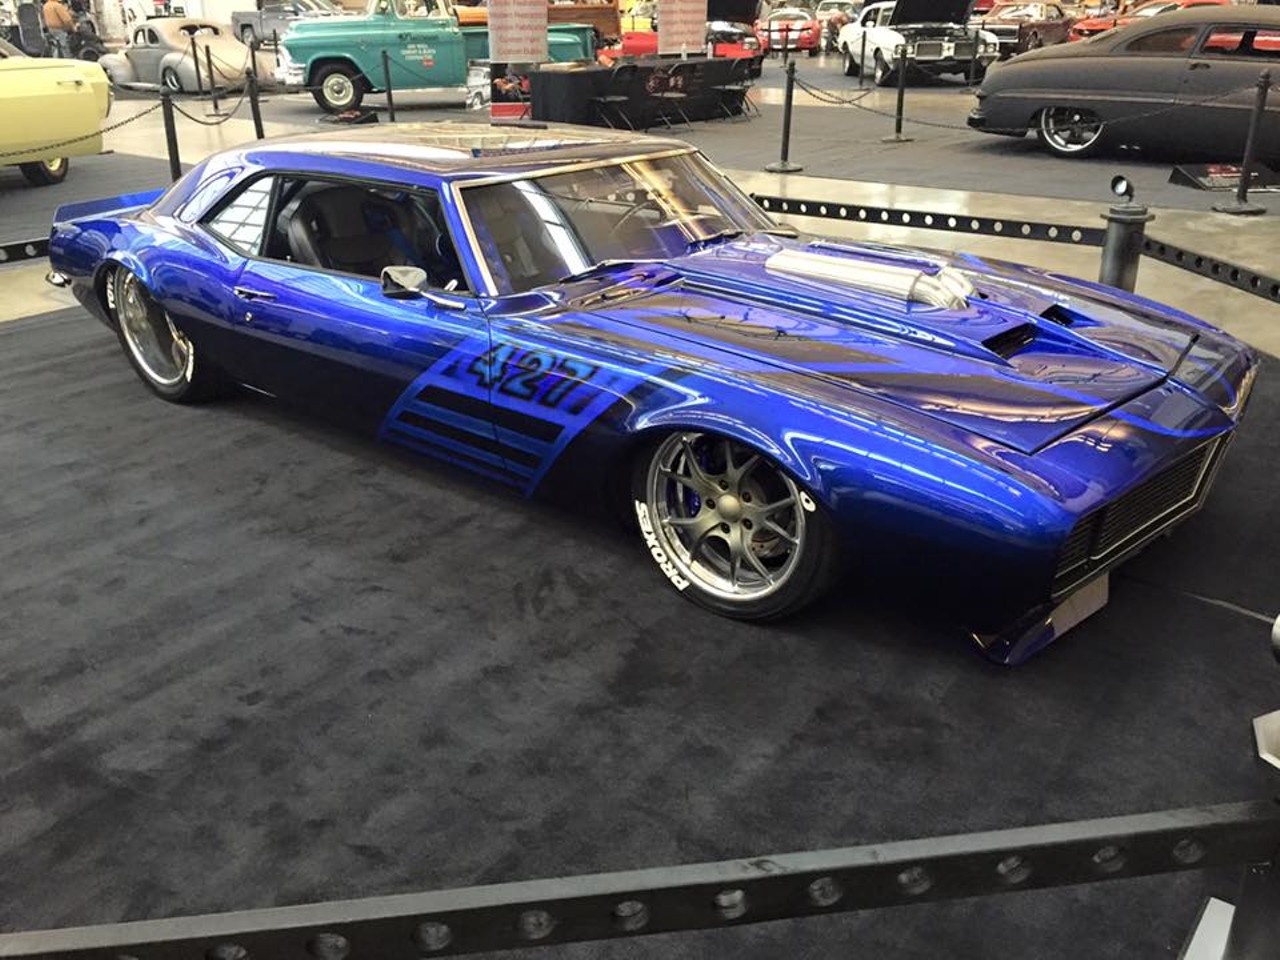 Autorama - Cobo Center, Detroit - 
Nothing says summer in the Motor City like classic cars and custom hotrods. From Feb. 26 to 28, Autorama brings a little slice of summer to Cobo to tide us over until cruising weather returns.